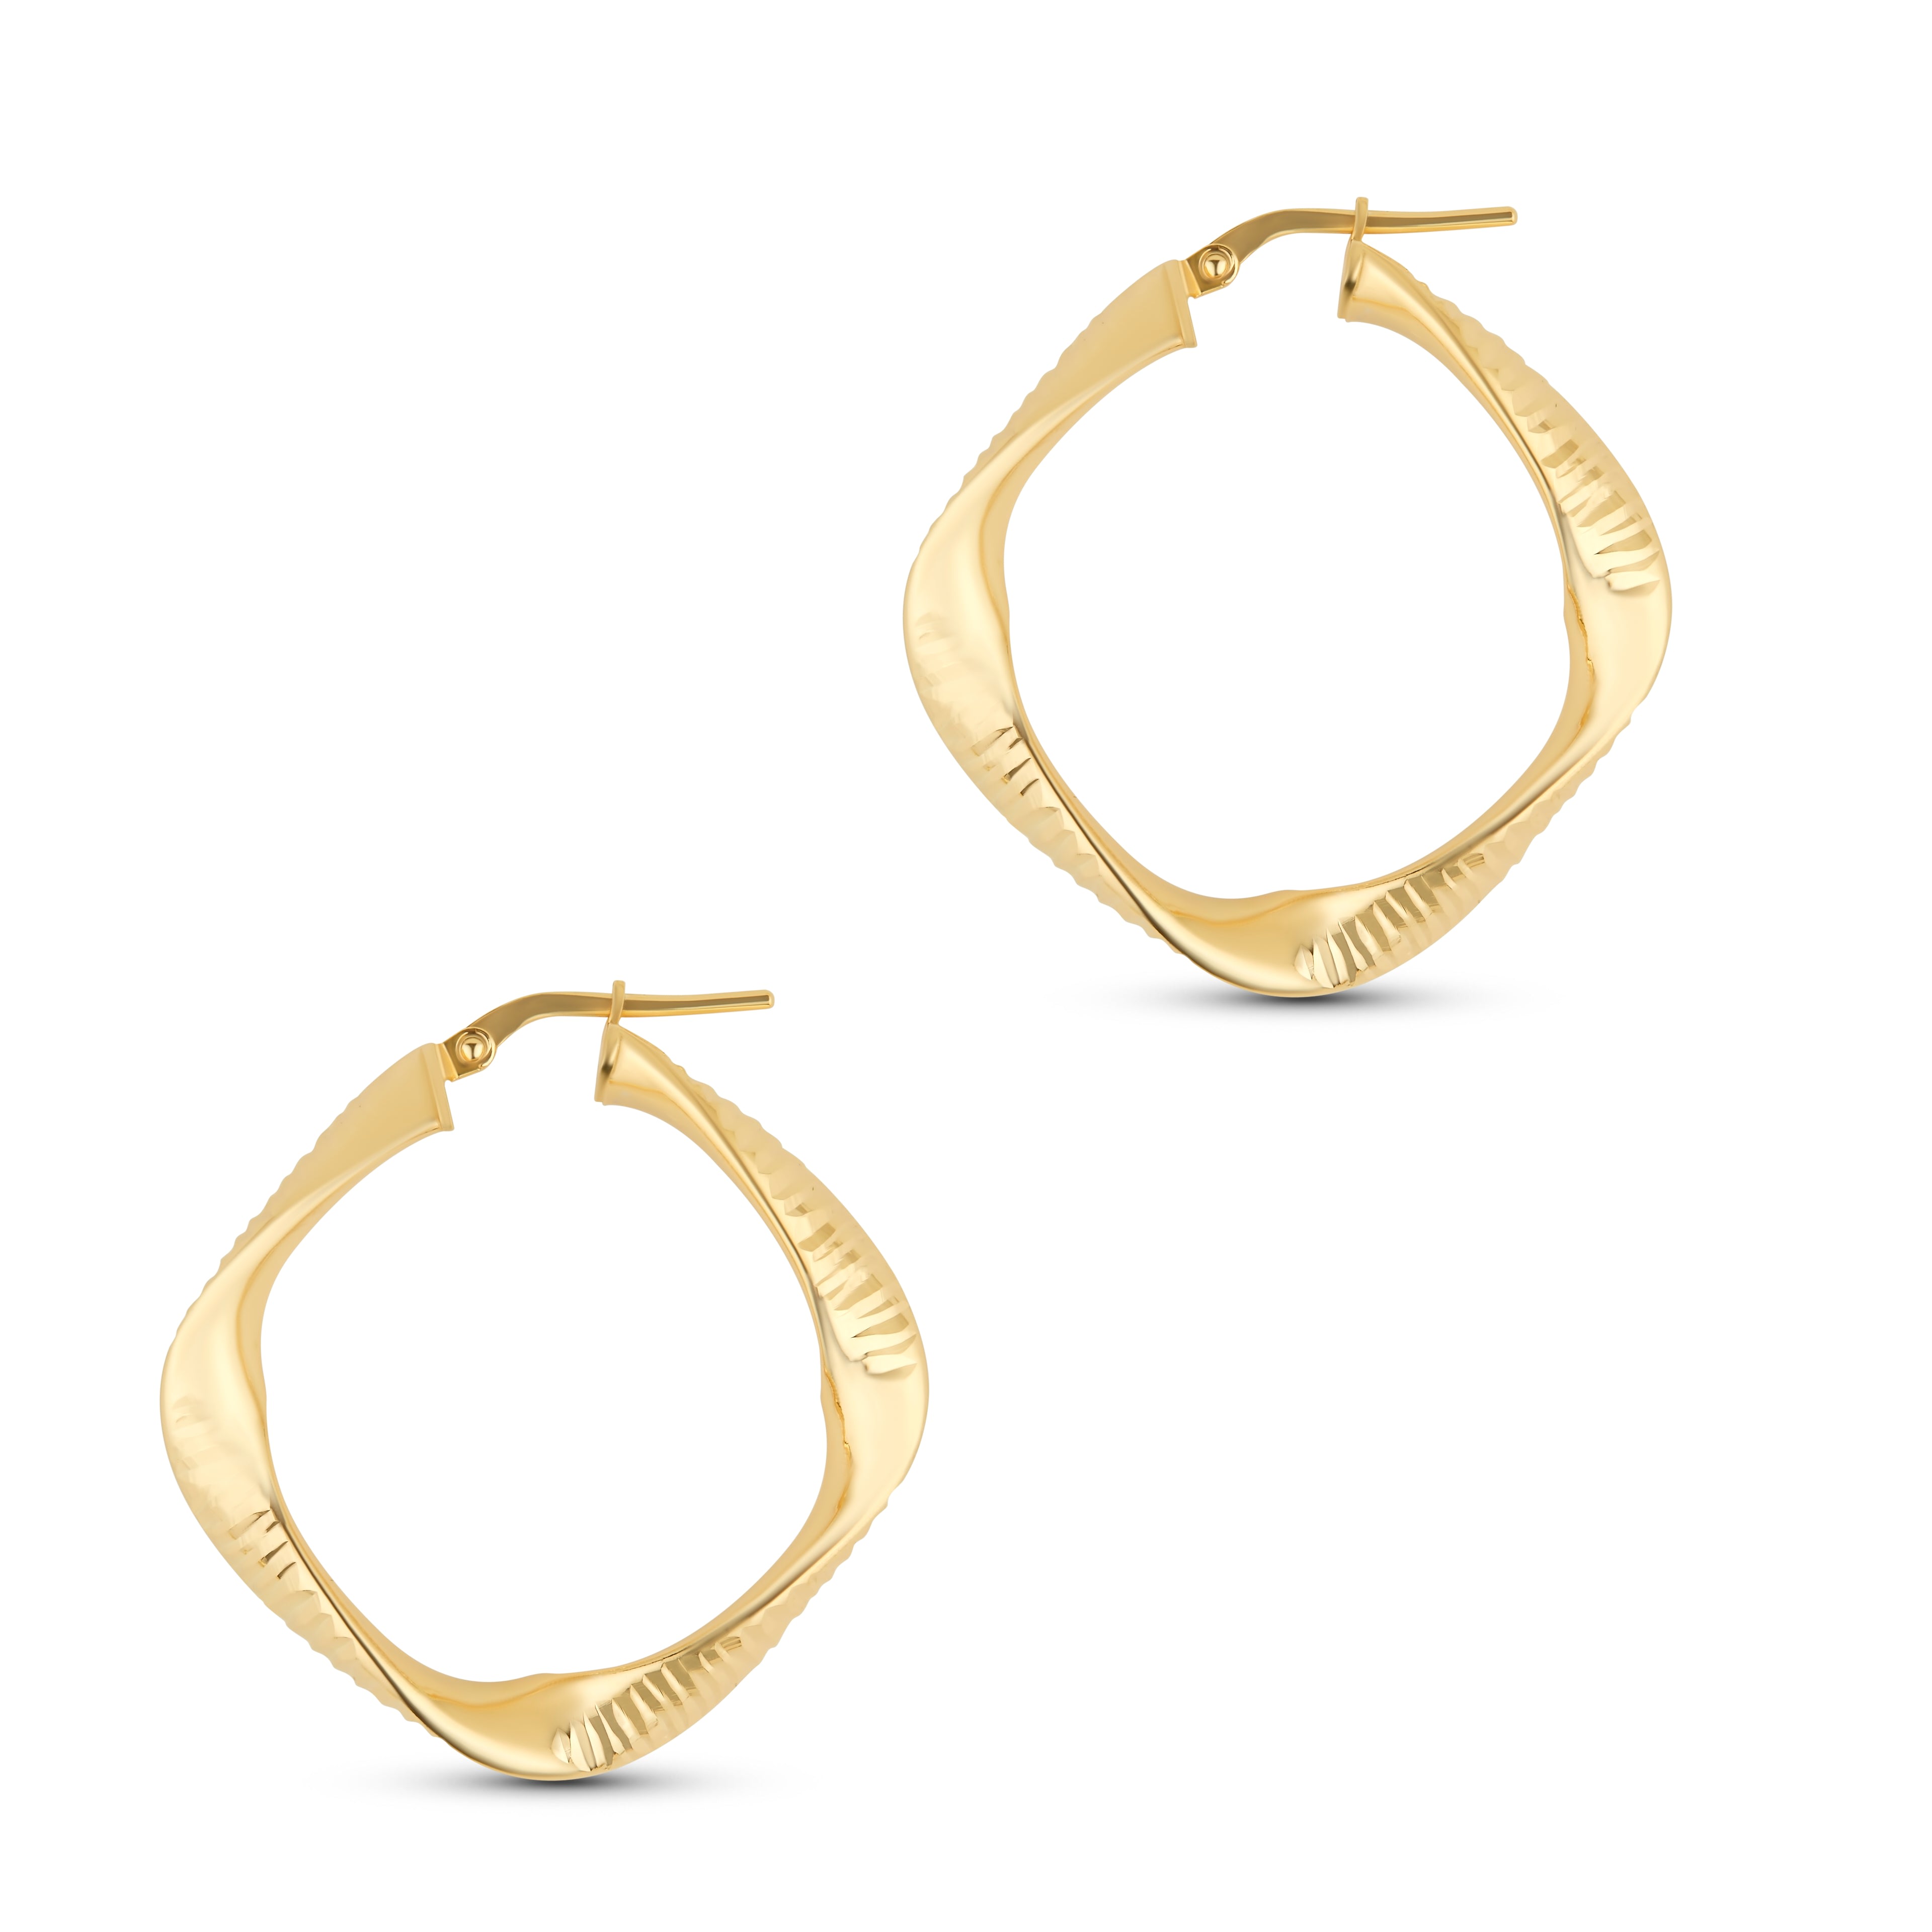 The Hoop Station Women's Textured Square Hoops - Gold